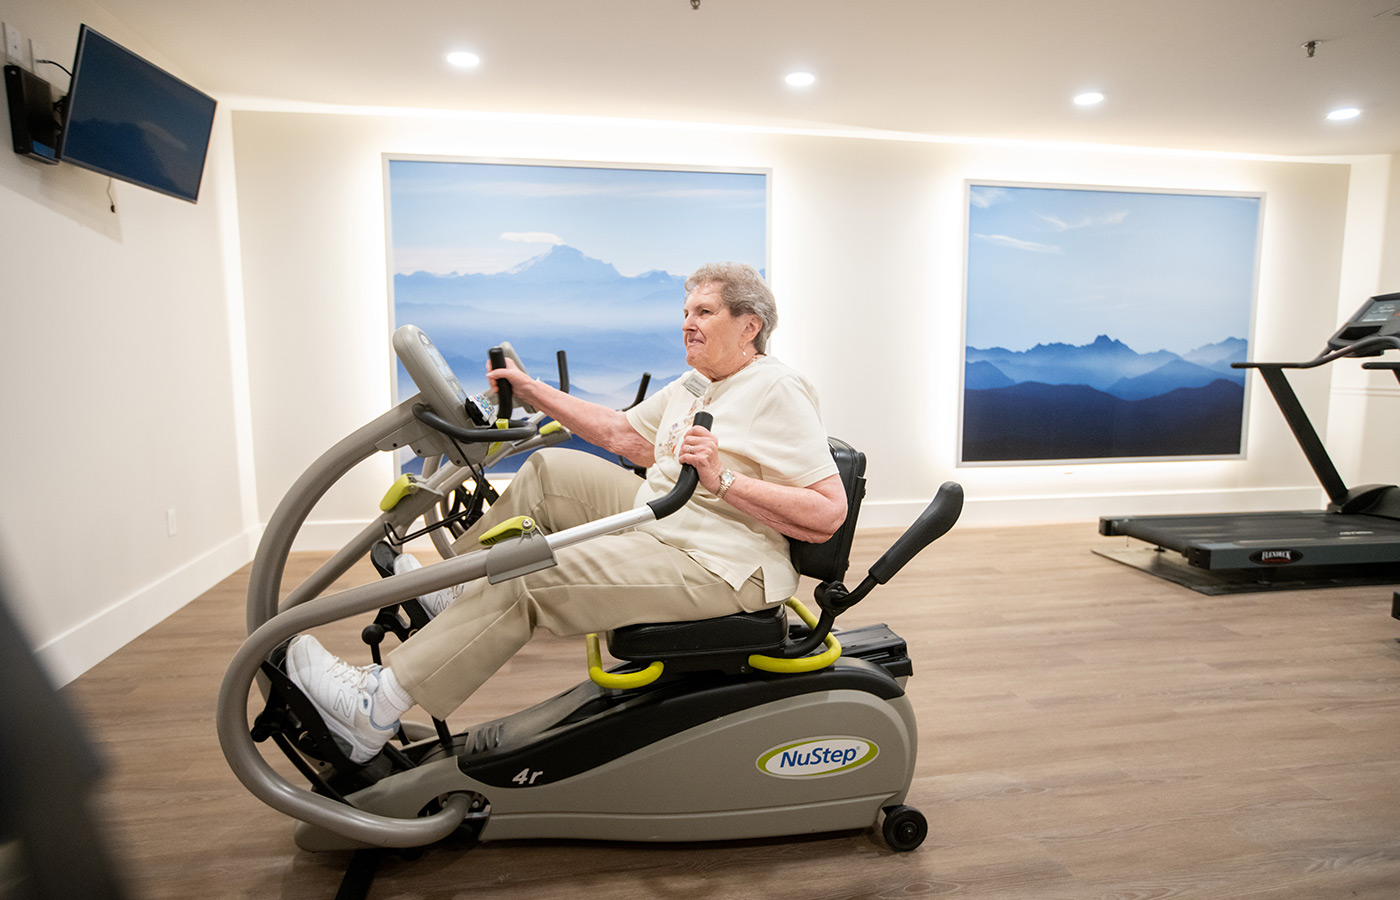 A person on an exercise bike.